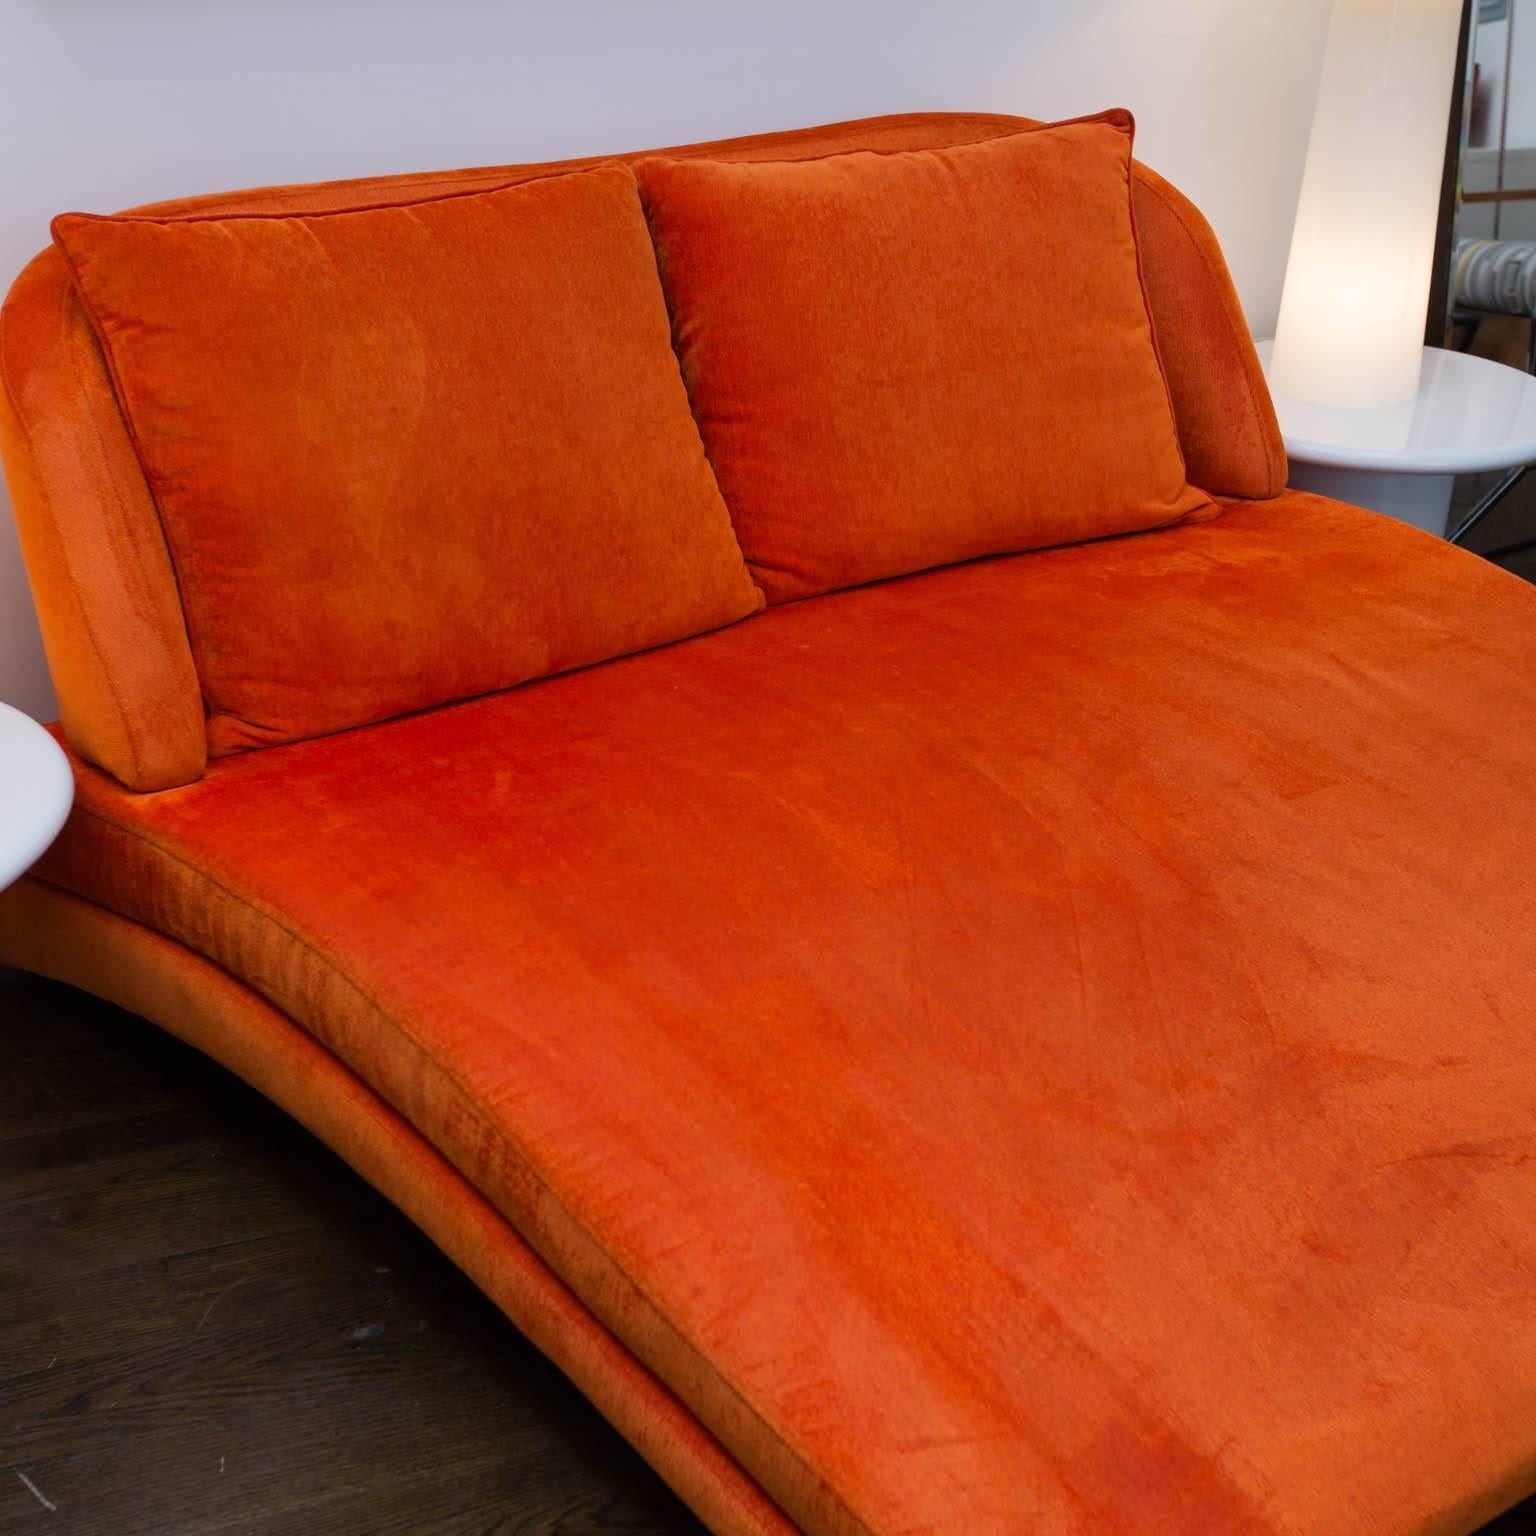 You will most likely never see another chaise quite like this one. It firs two comfortably and is finished in a durable orange cotton linen that is removable for dry cleaning.